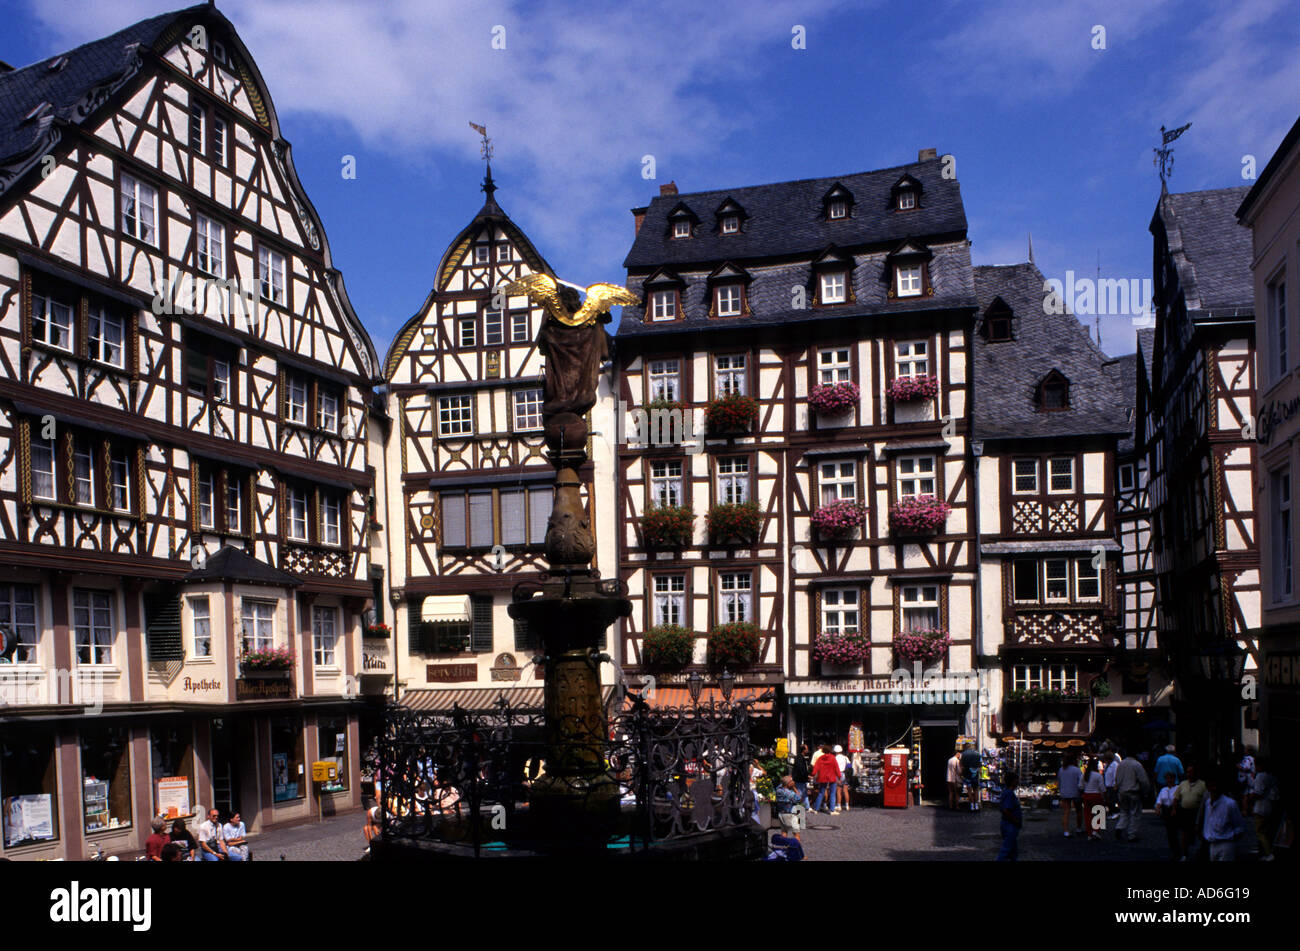 Germany wine Moselle half-timbered timbered framework architecture romanticism romance romantic old old, aged antique ancient Stock Photo